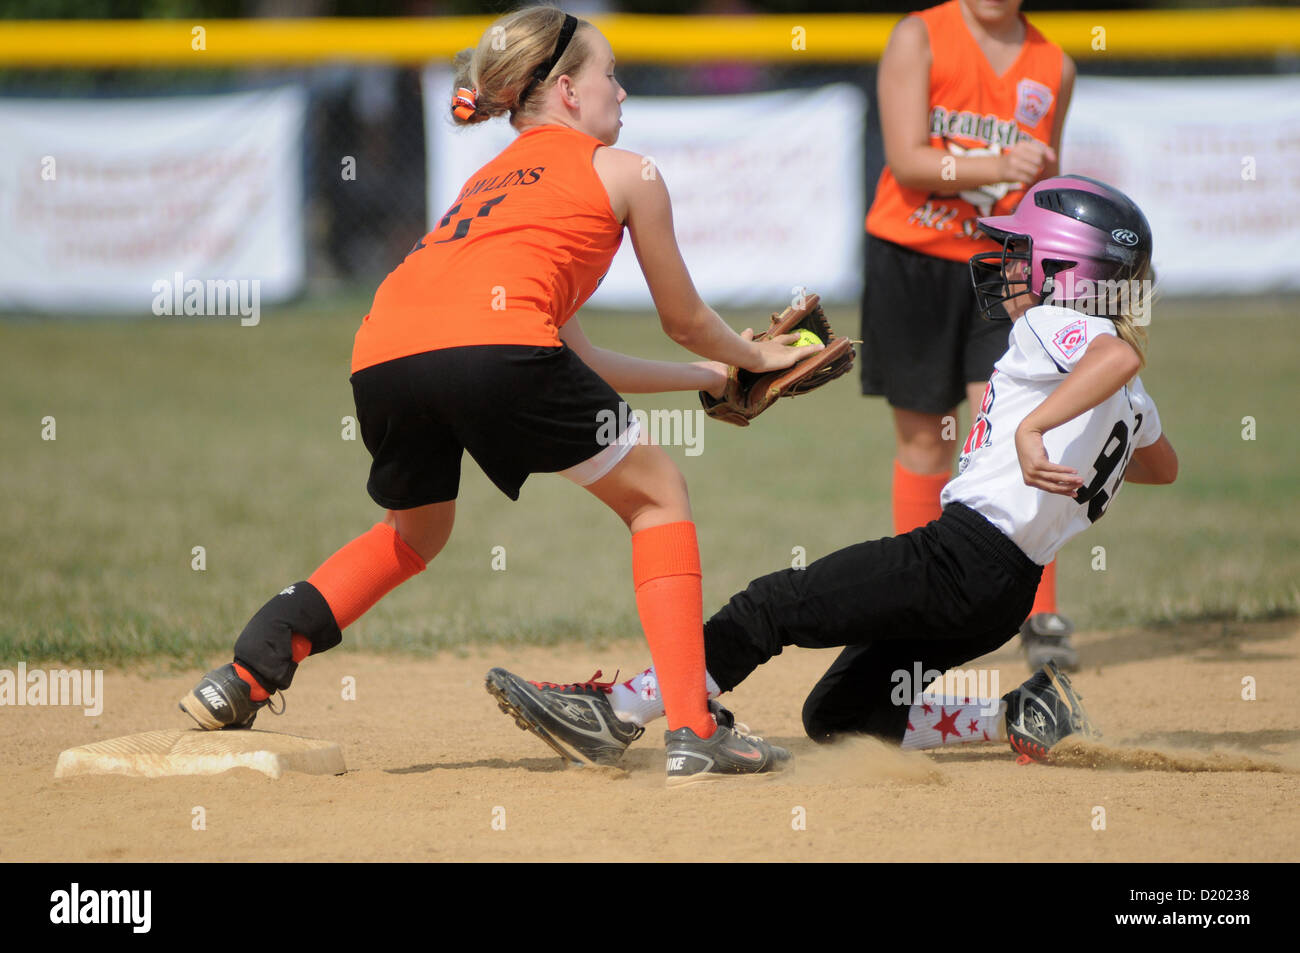 Softball Infielder tags a base runner as she slides into second base Little League game Stock Photo